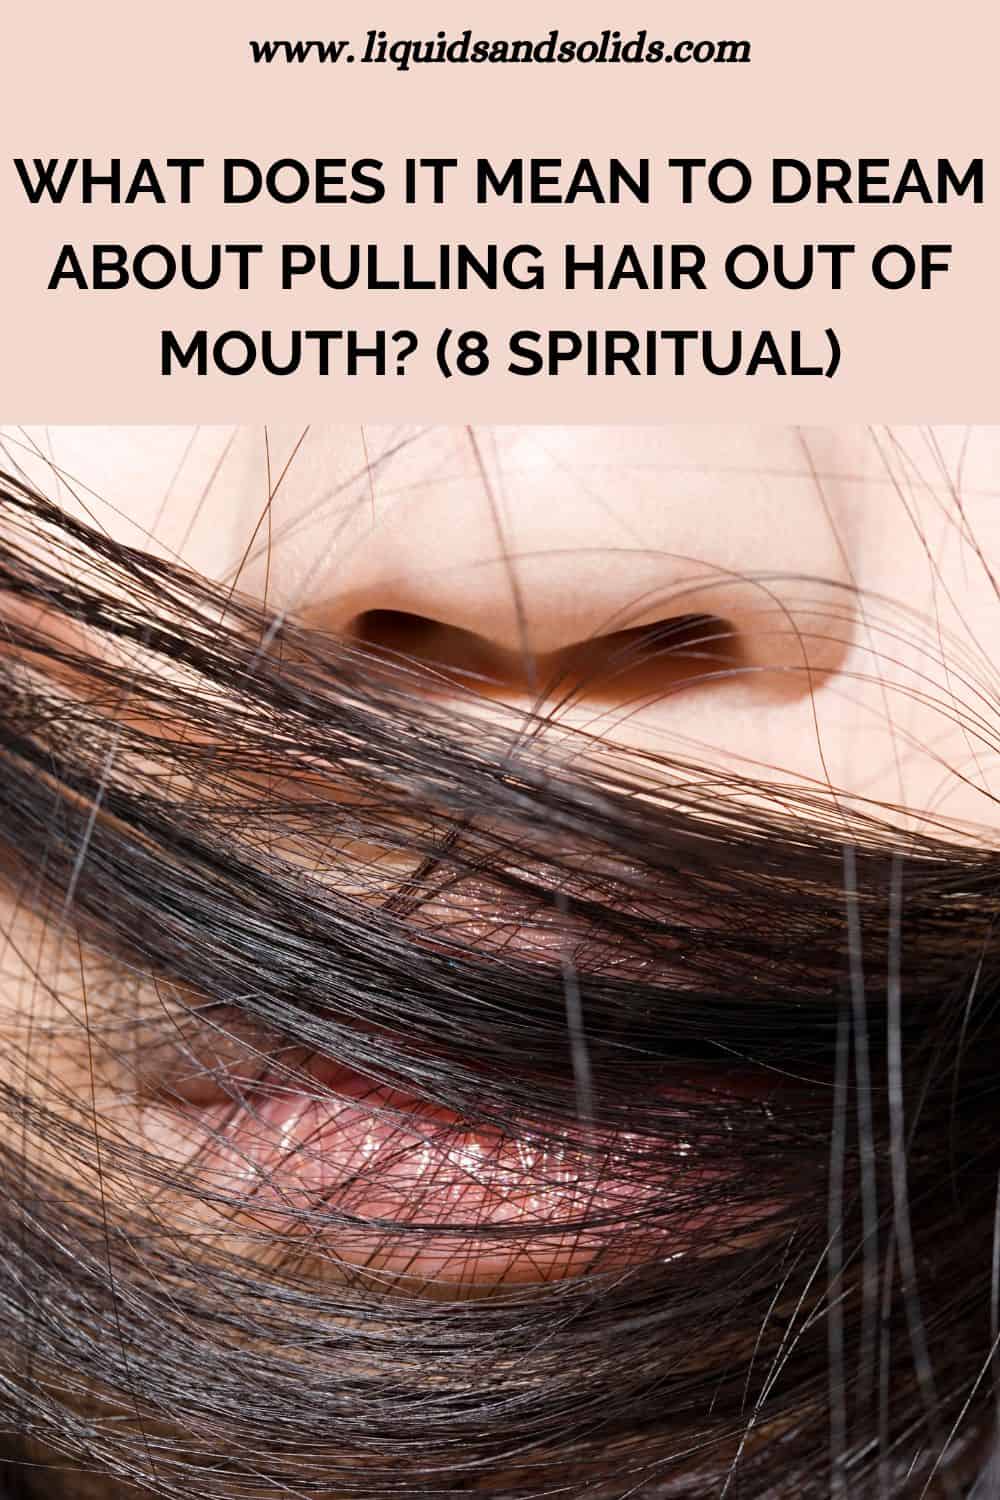 What Does It Mean To Dream About Pulling Hair Out Of Mouth? (8 Spiritual)